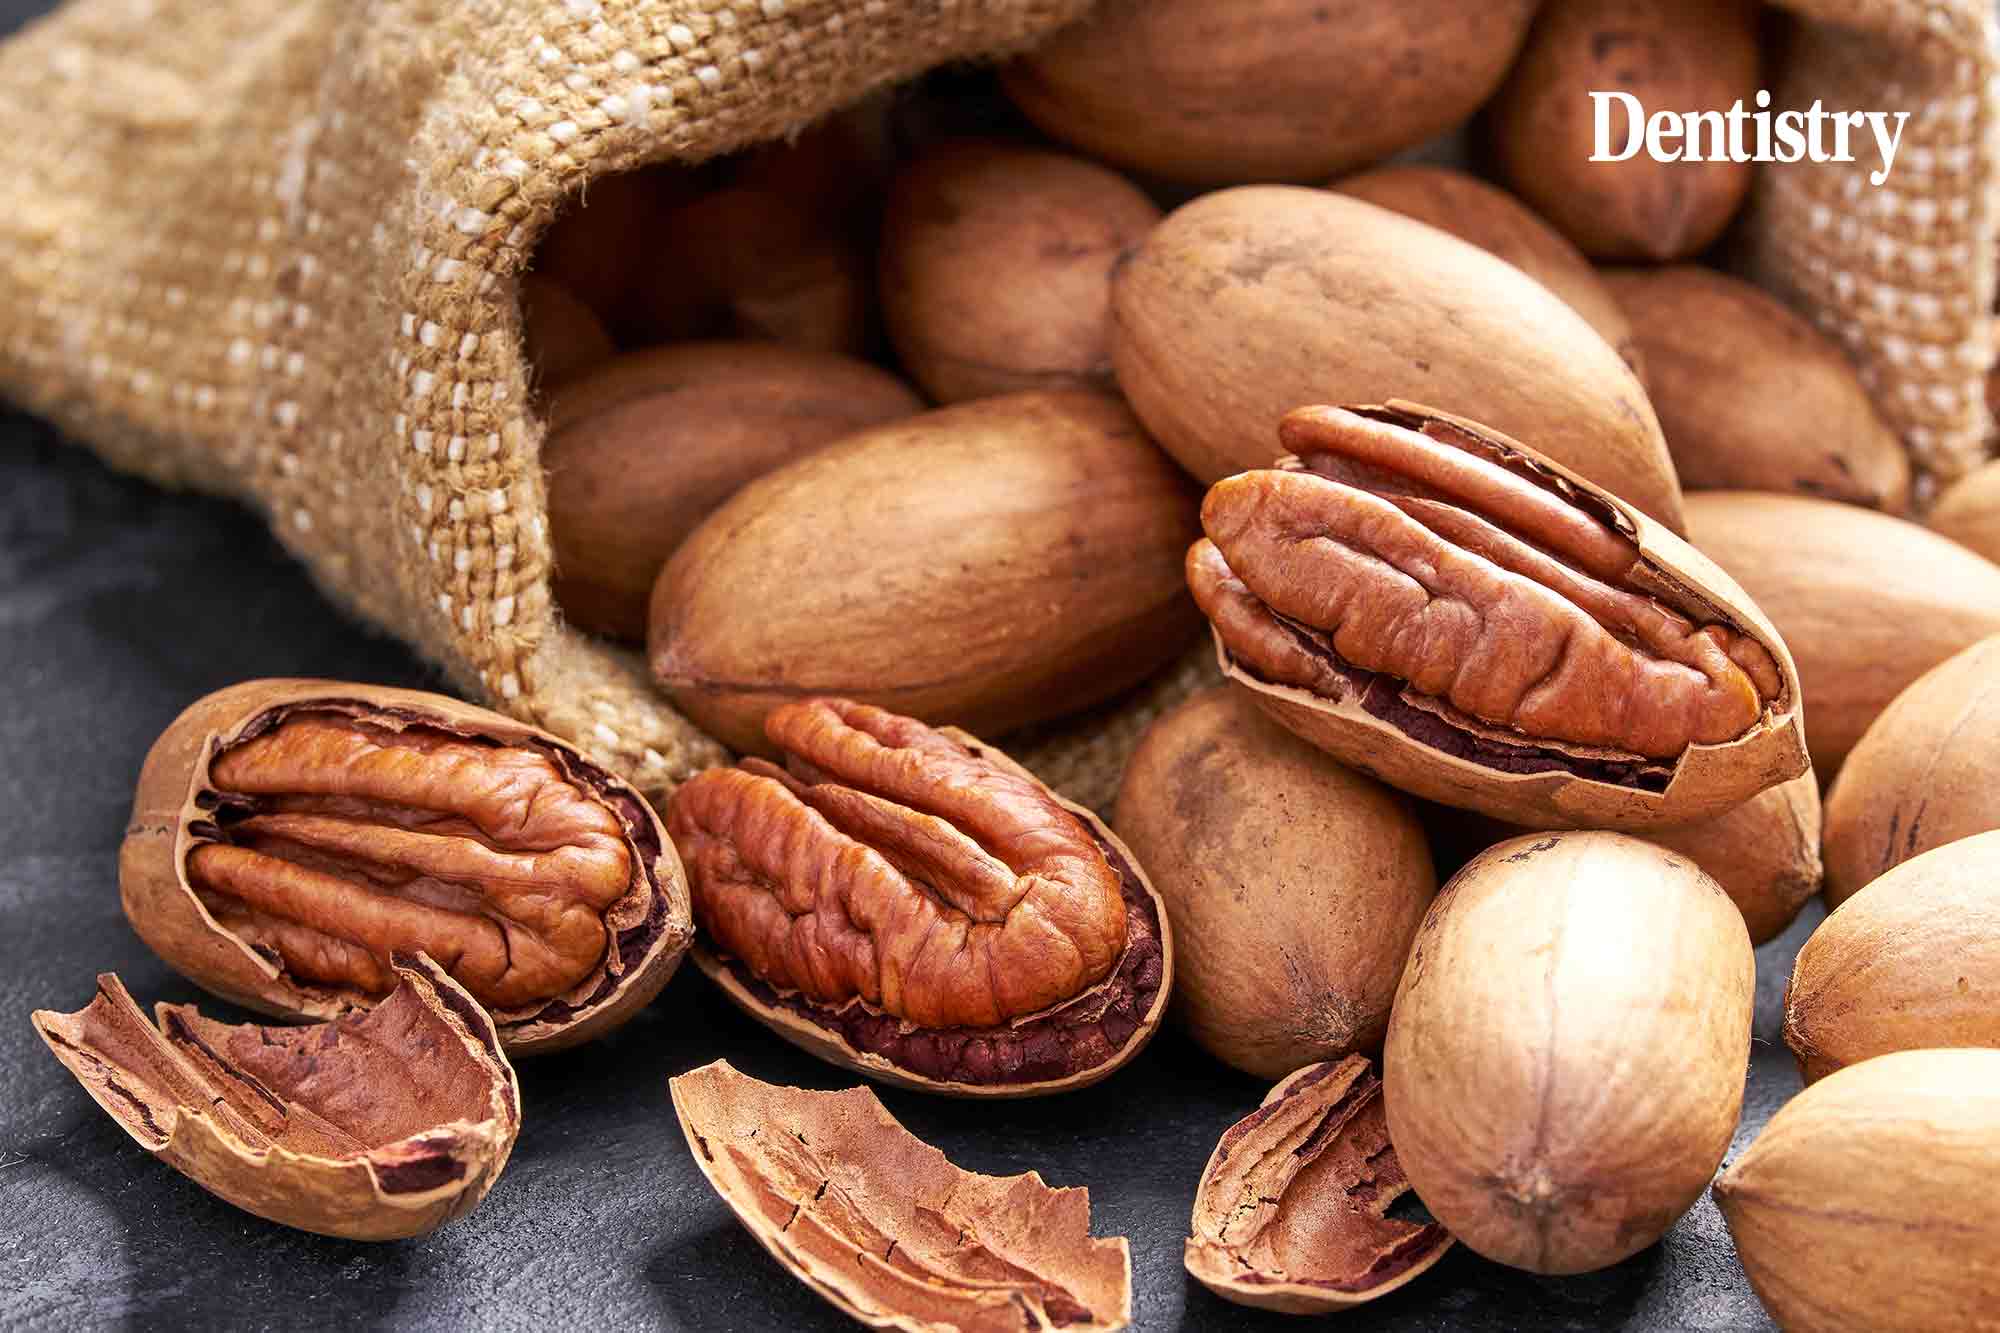 Can eating pecans help to curb obesity?